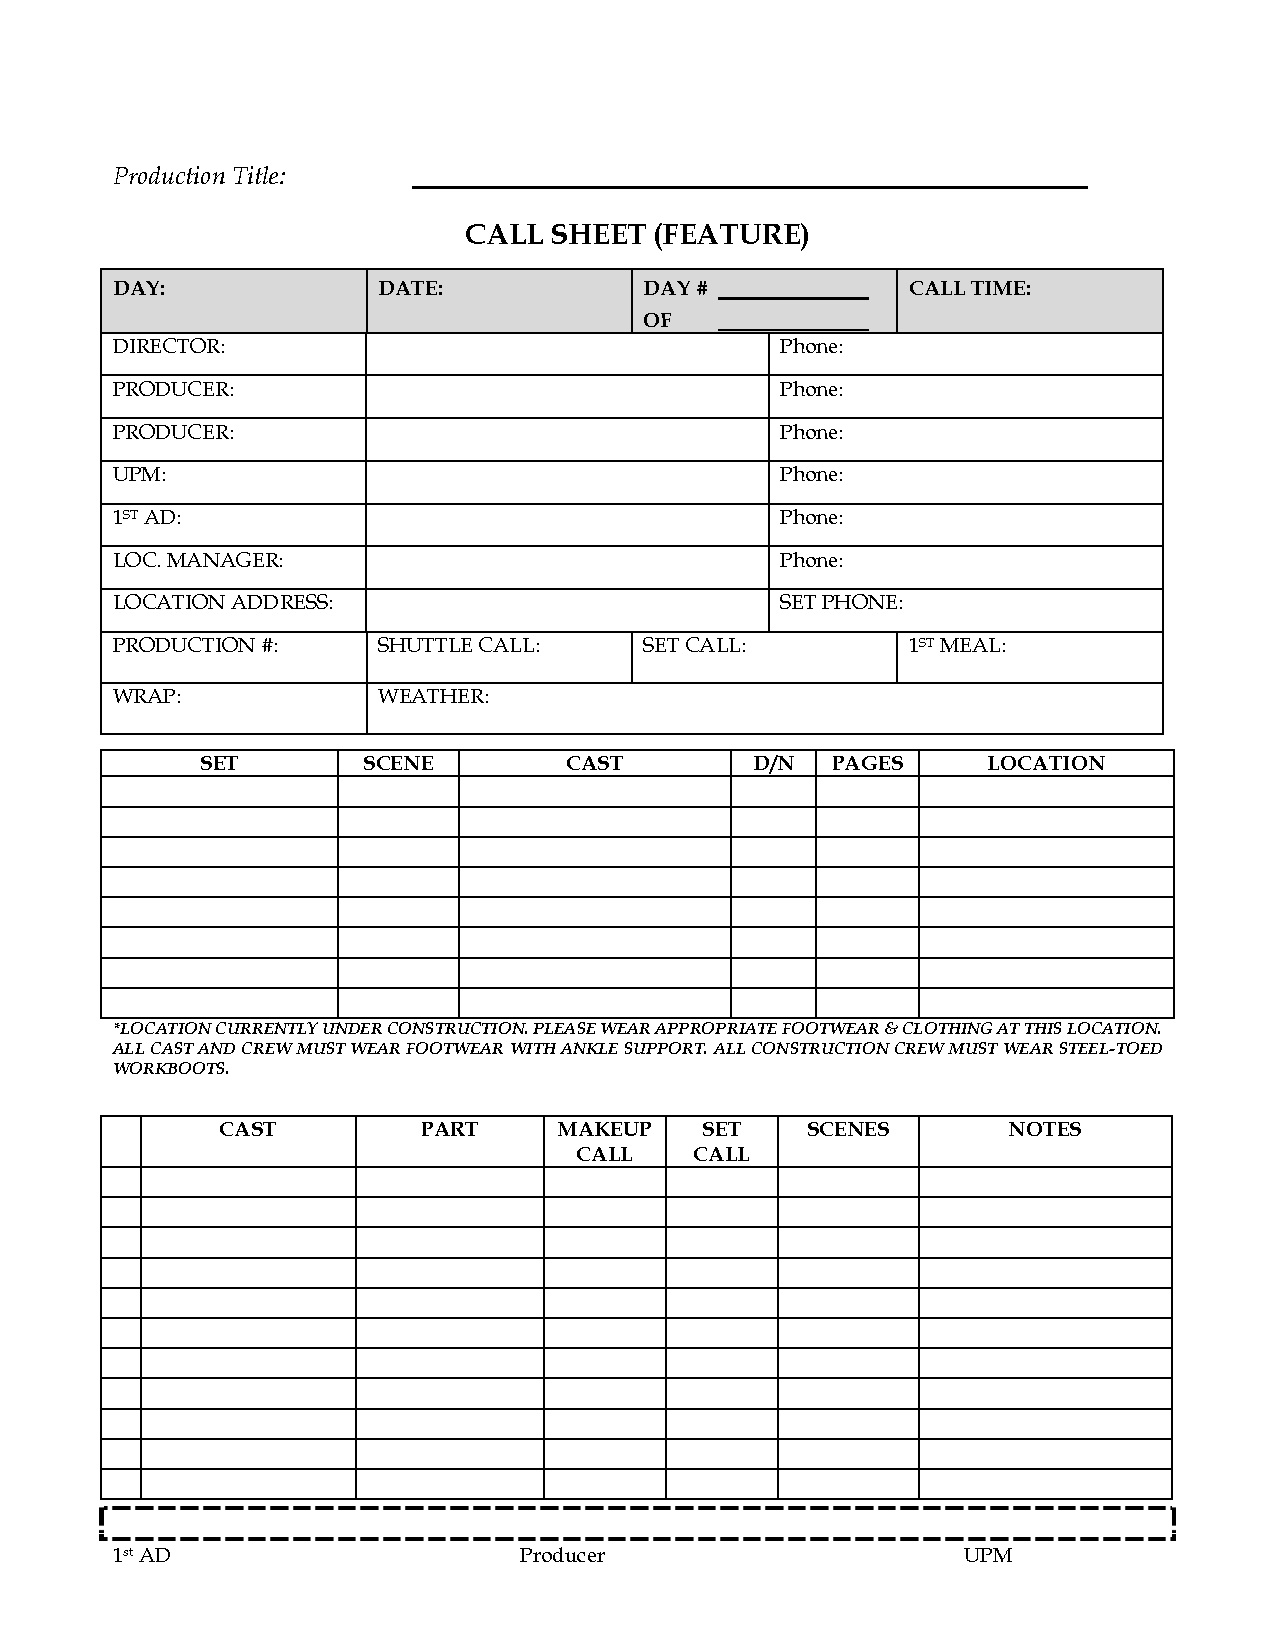 Awesome Call Sheet (Feature) Template Sample For Film In Film Call Sheet Template Word